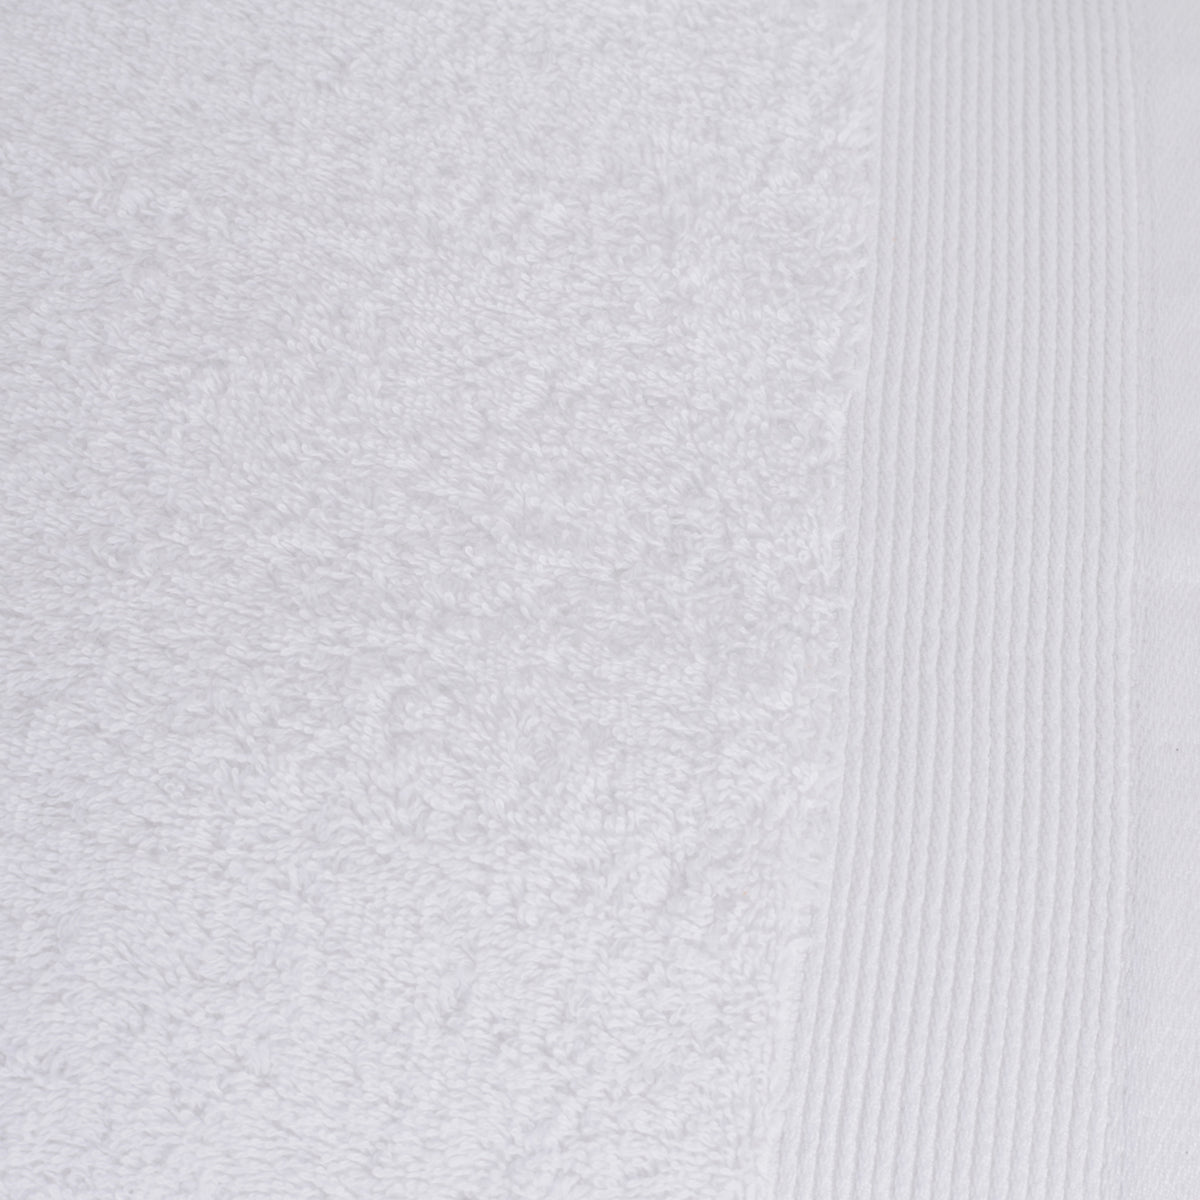 Embedded Stripe 550 GSM Antimicrobial Antifungal Super Cotton Absorbent & Soft Towel